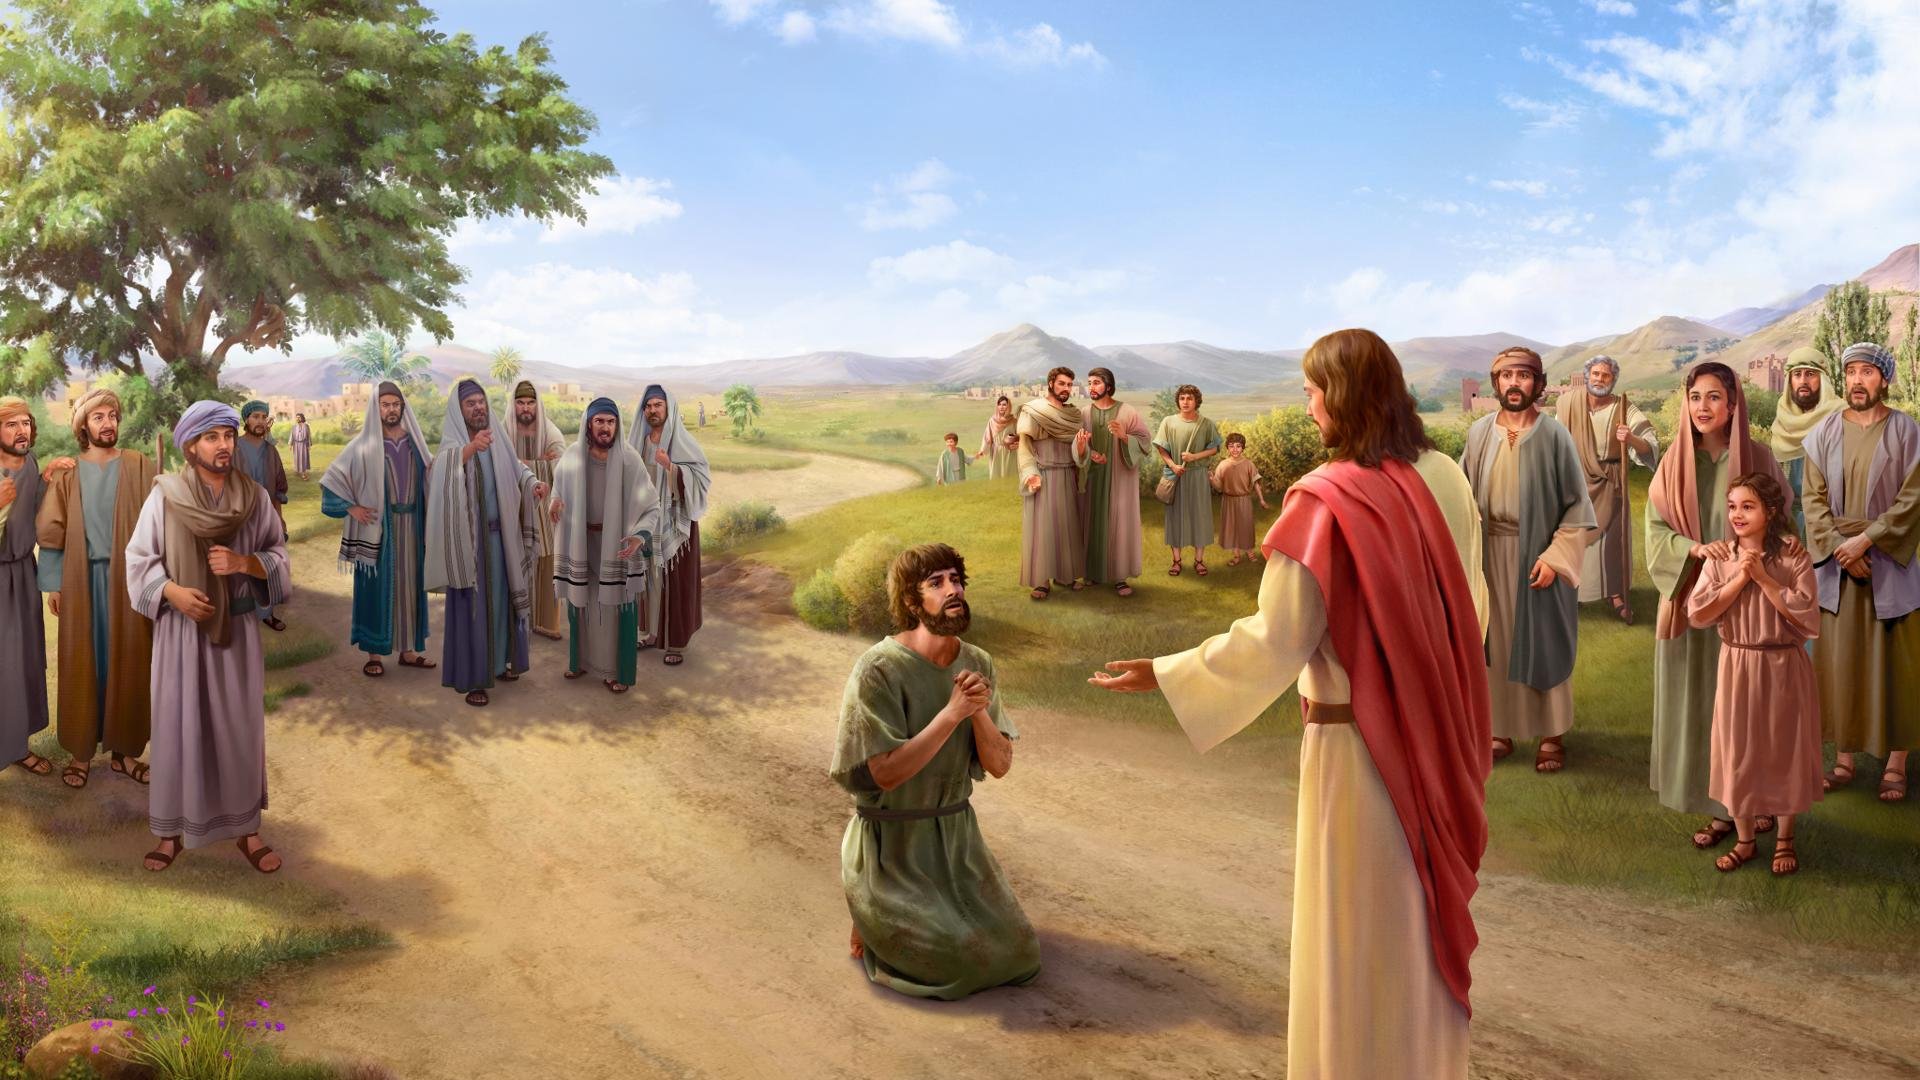 While The Lord Jesus Healing A Man, The Pharisees Blaspheming And Resisting The Lord Jesus